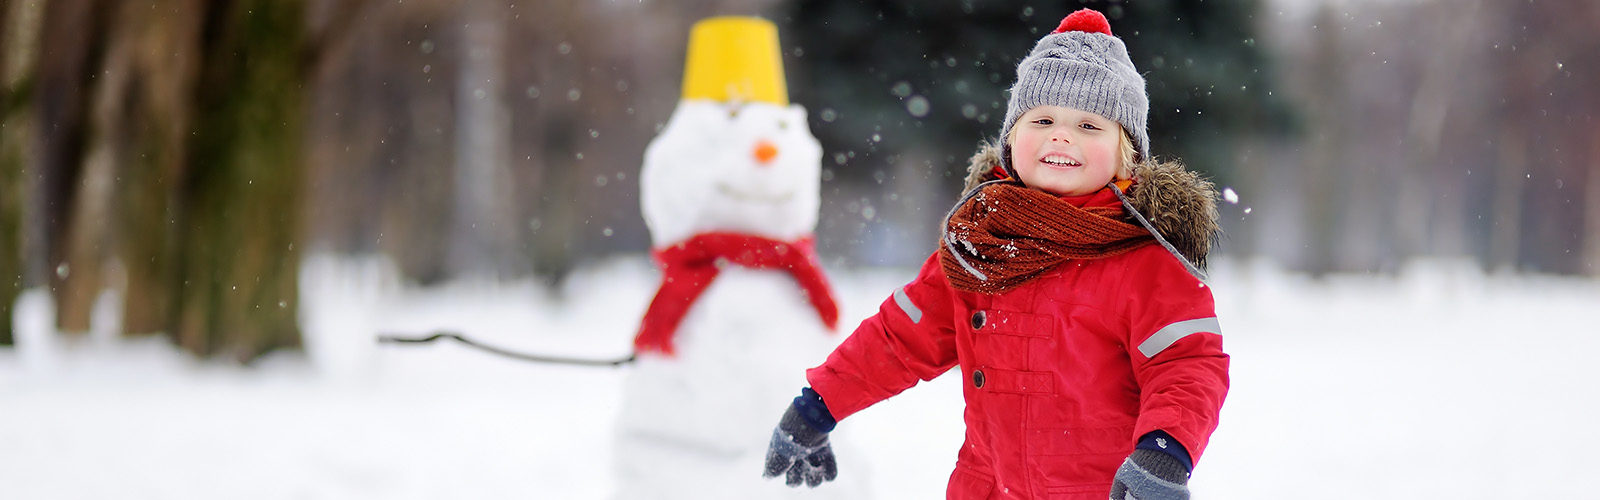 child dressed in red snowsuit running toward camera with snowman in background